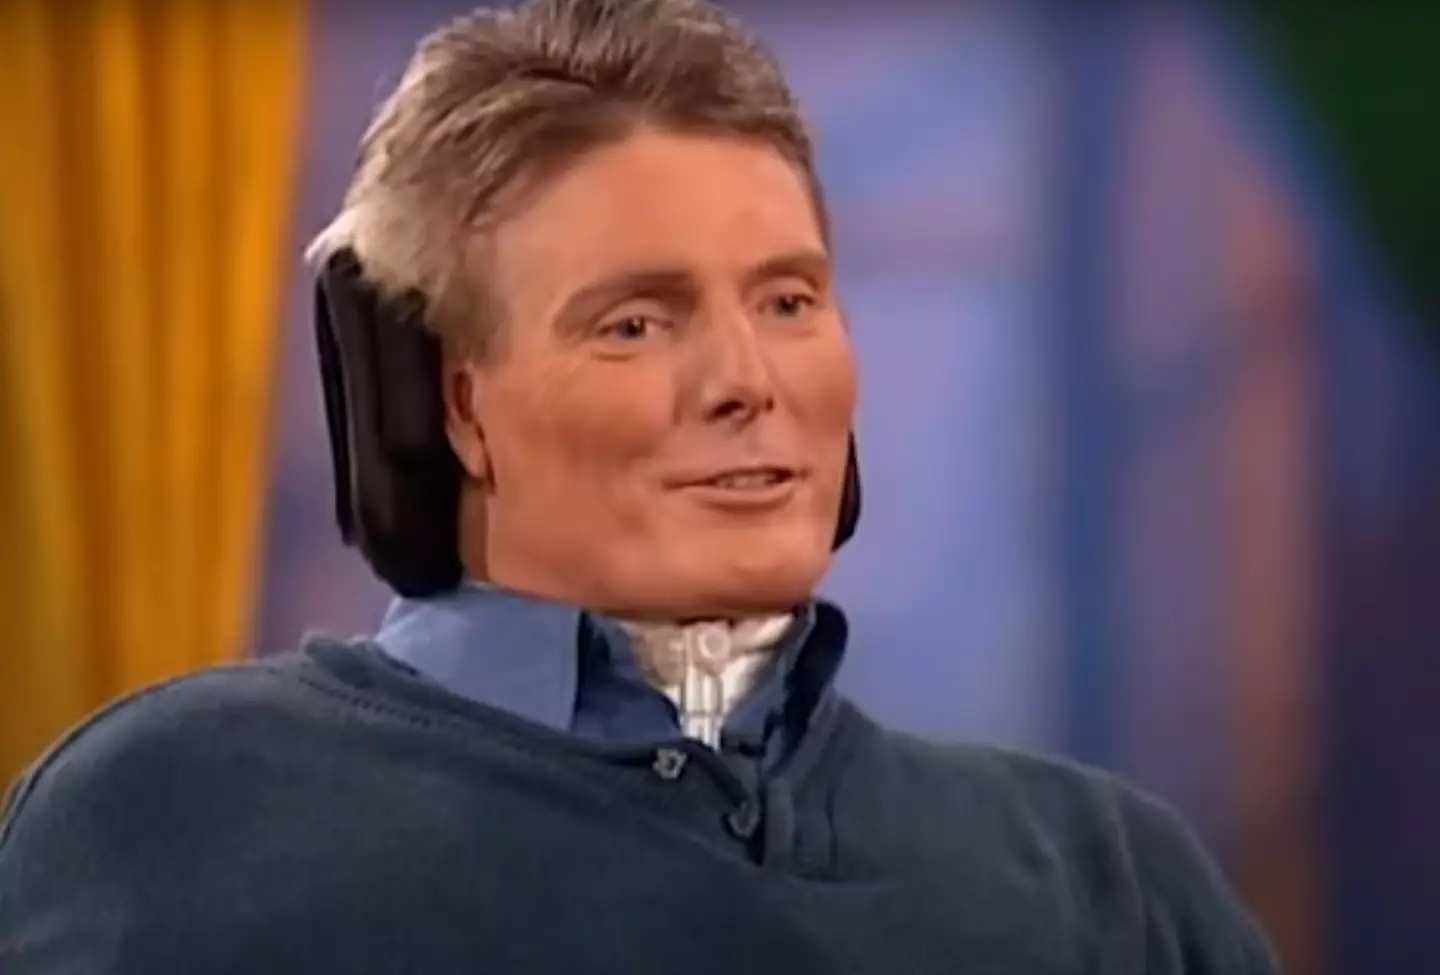 Christopher Reeve made the remark in an interview with Oprah Winfrey.